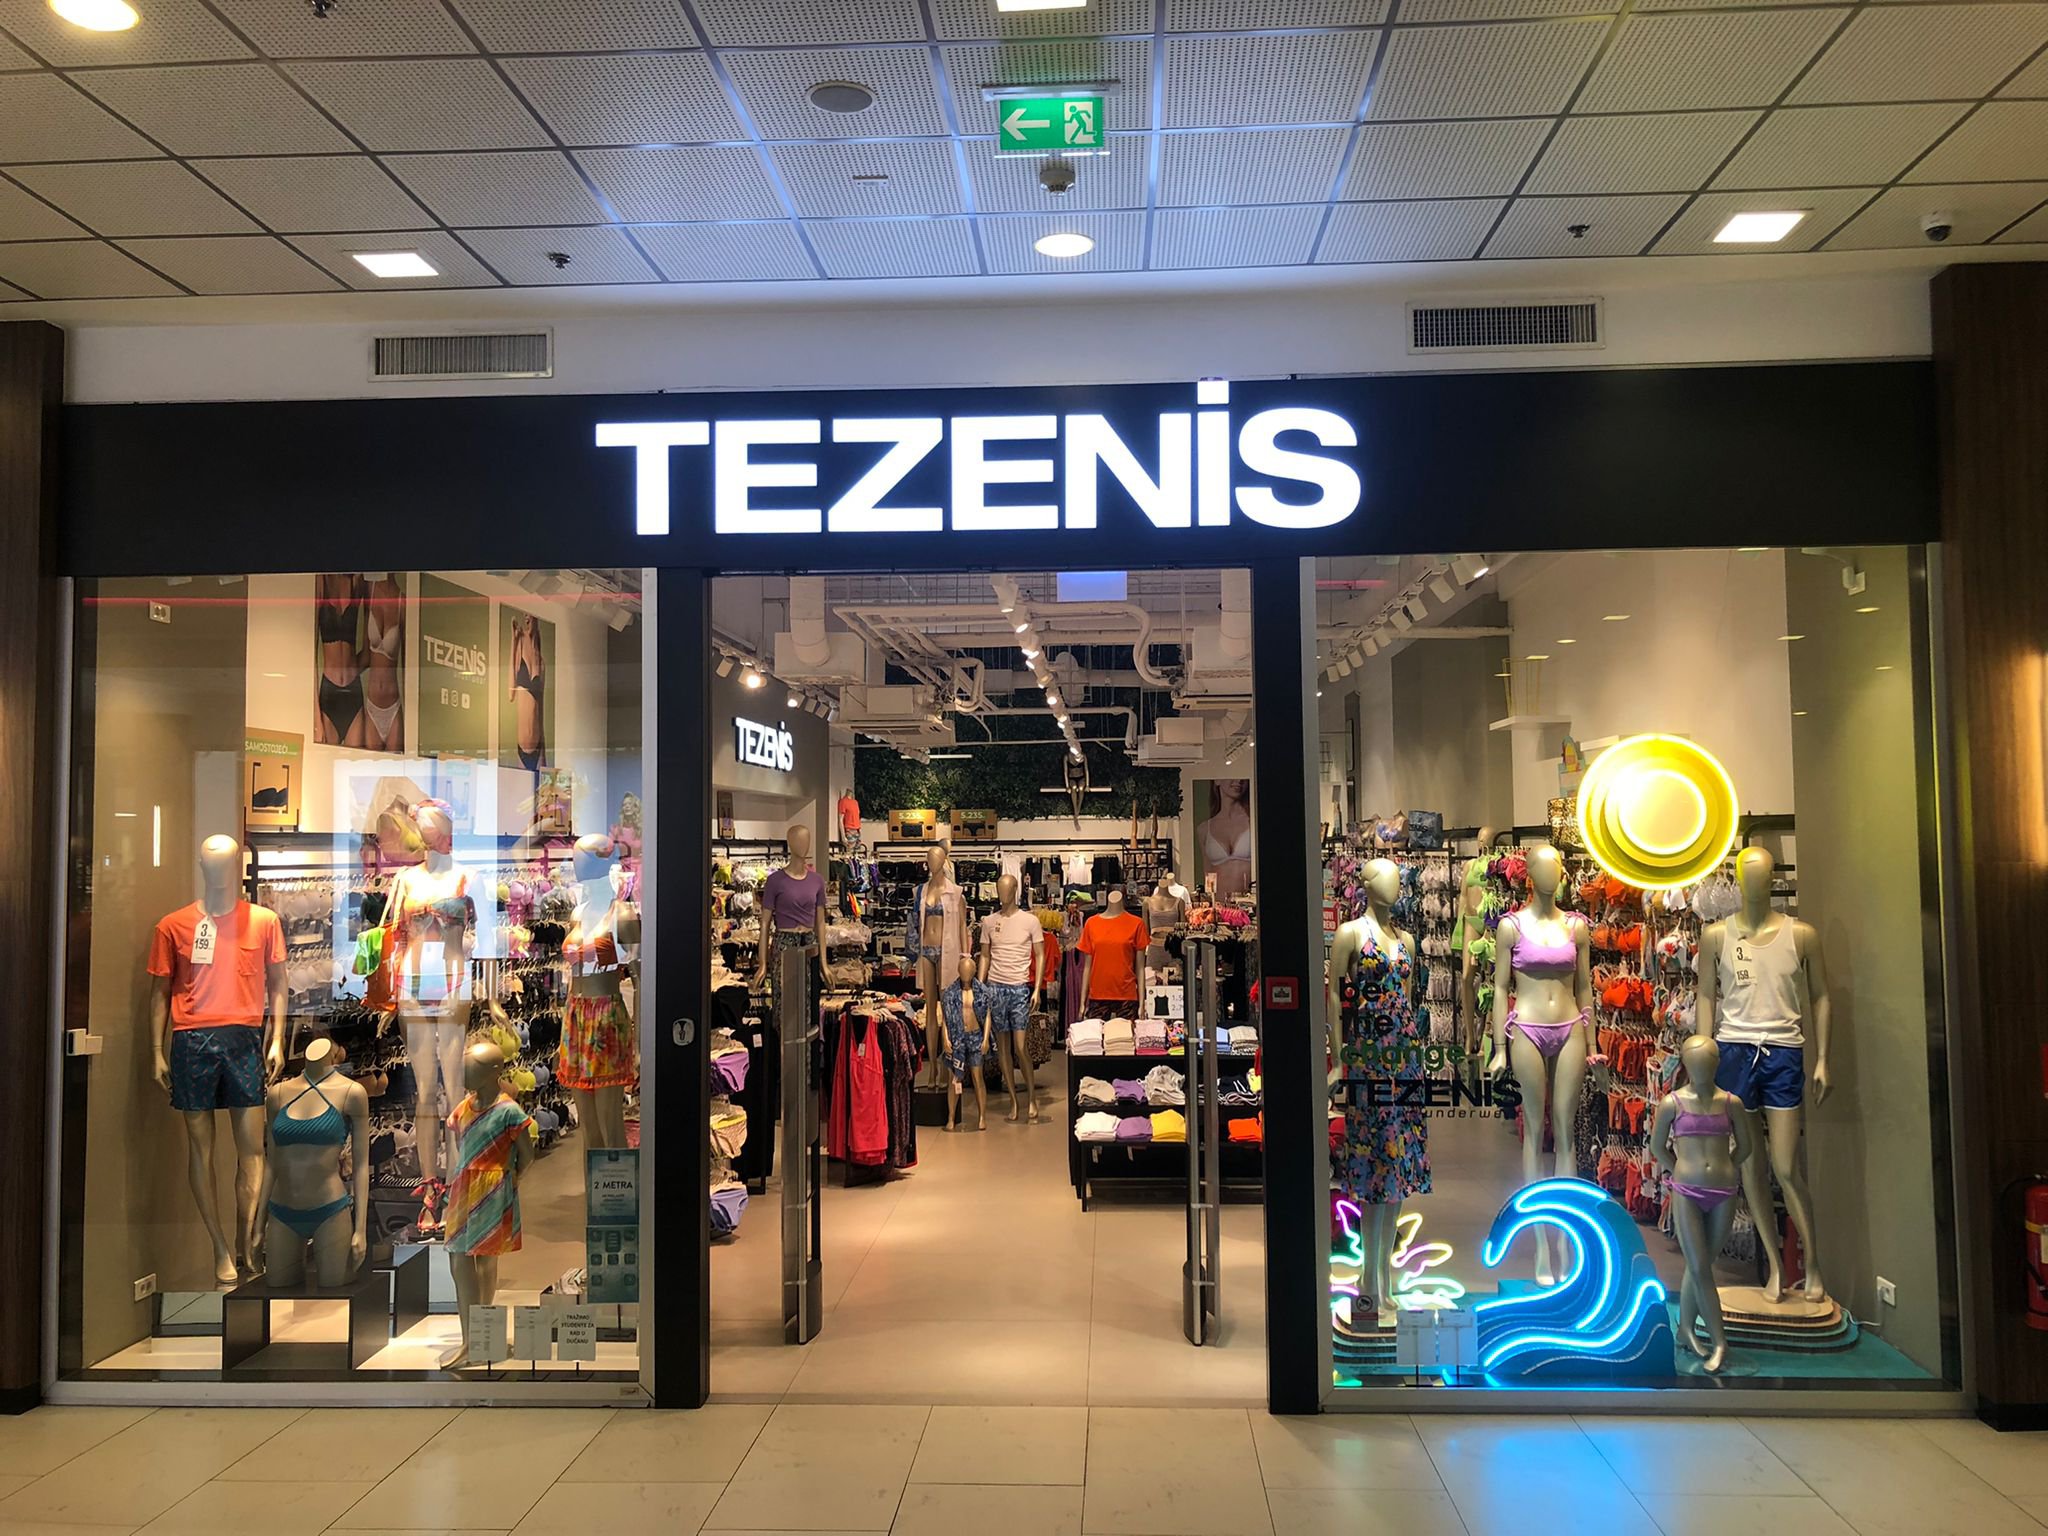 The best addresses for Clothing Store - Men in Zagreb. There are